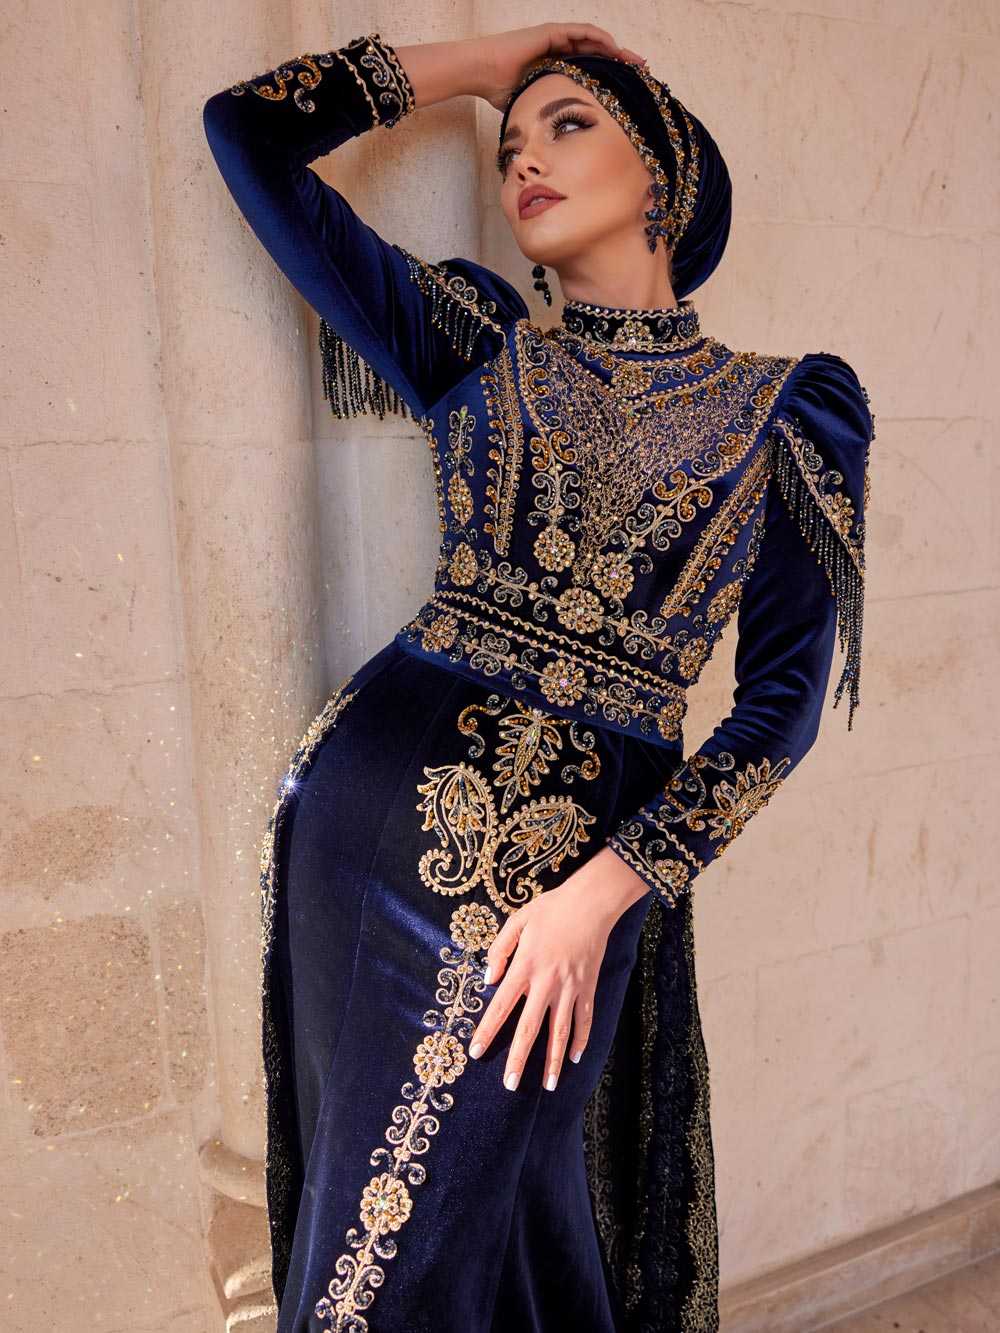 Sultan Dress - Turkish Evening Dresses - Muslim Party & Prom Gown